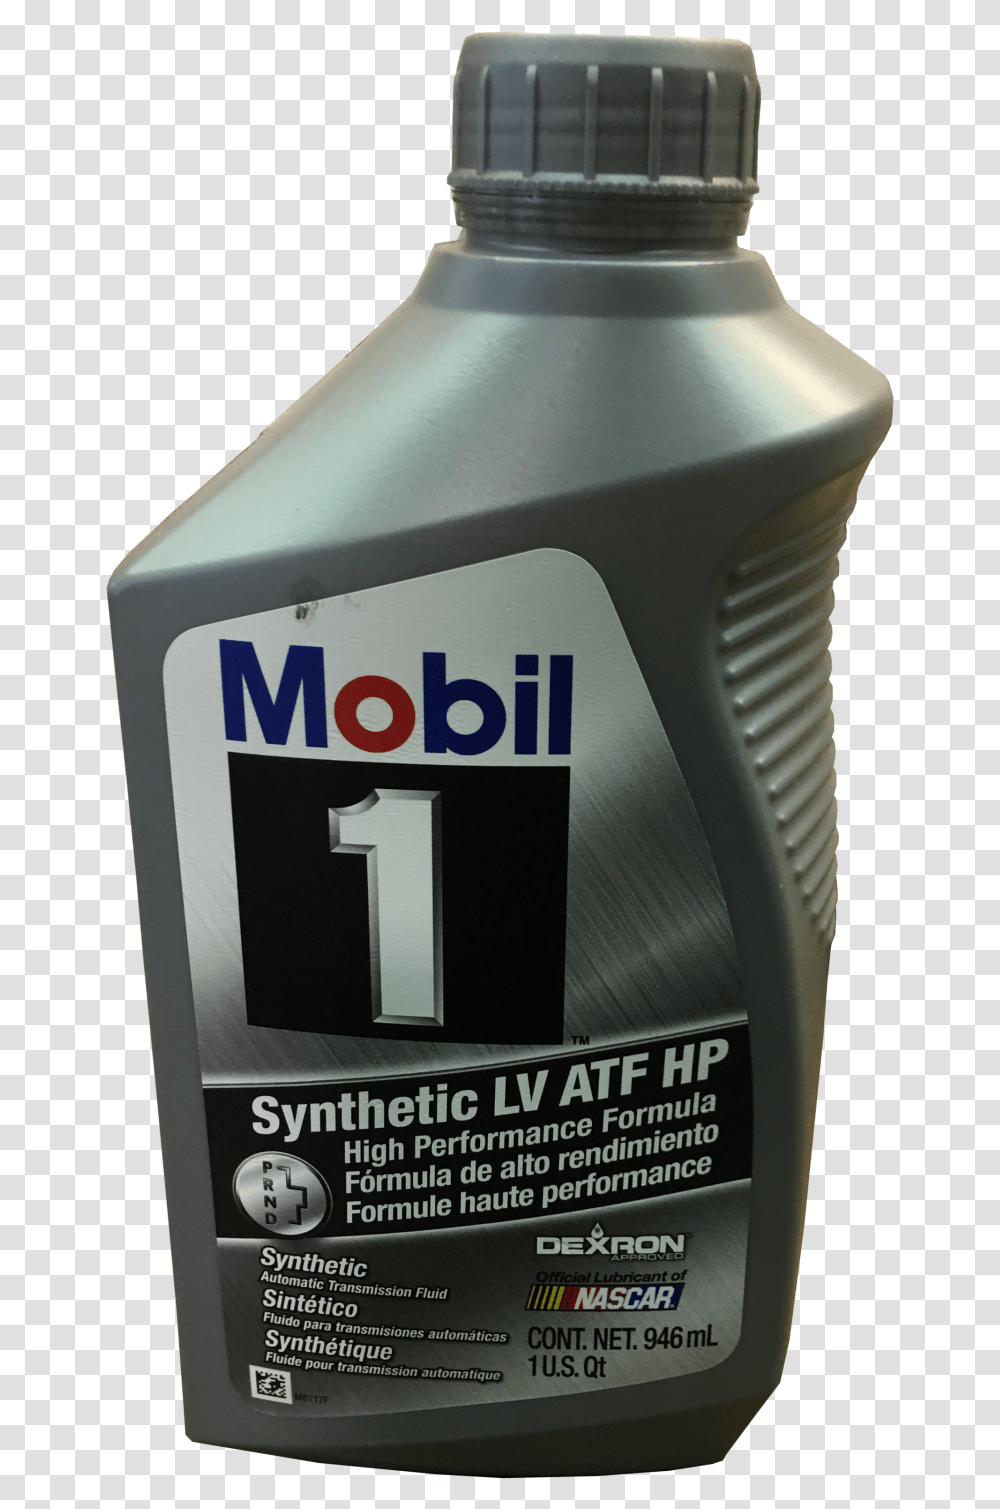 Mobil 1 Lv Atf Hp Mobil Lv Atf Hp, Cosmetics, Bottle, Deodorant, Fire Hydrant Transparent Png